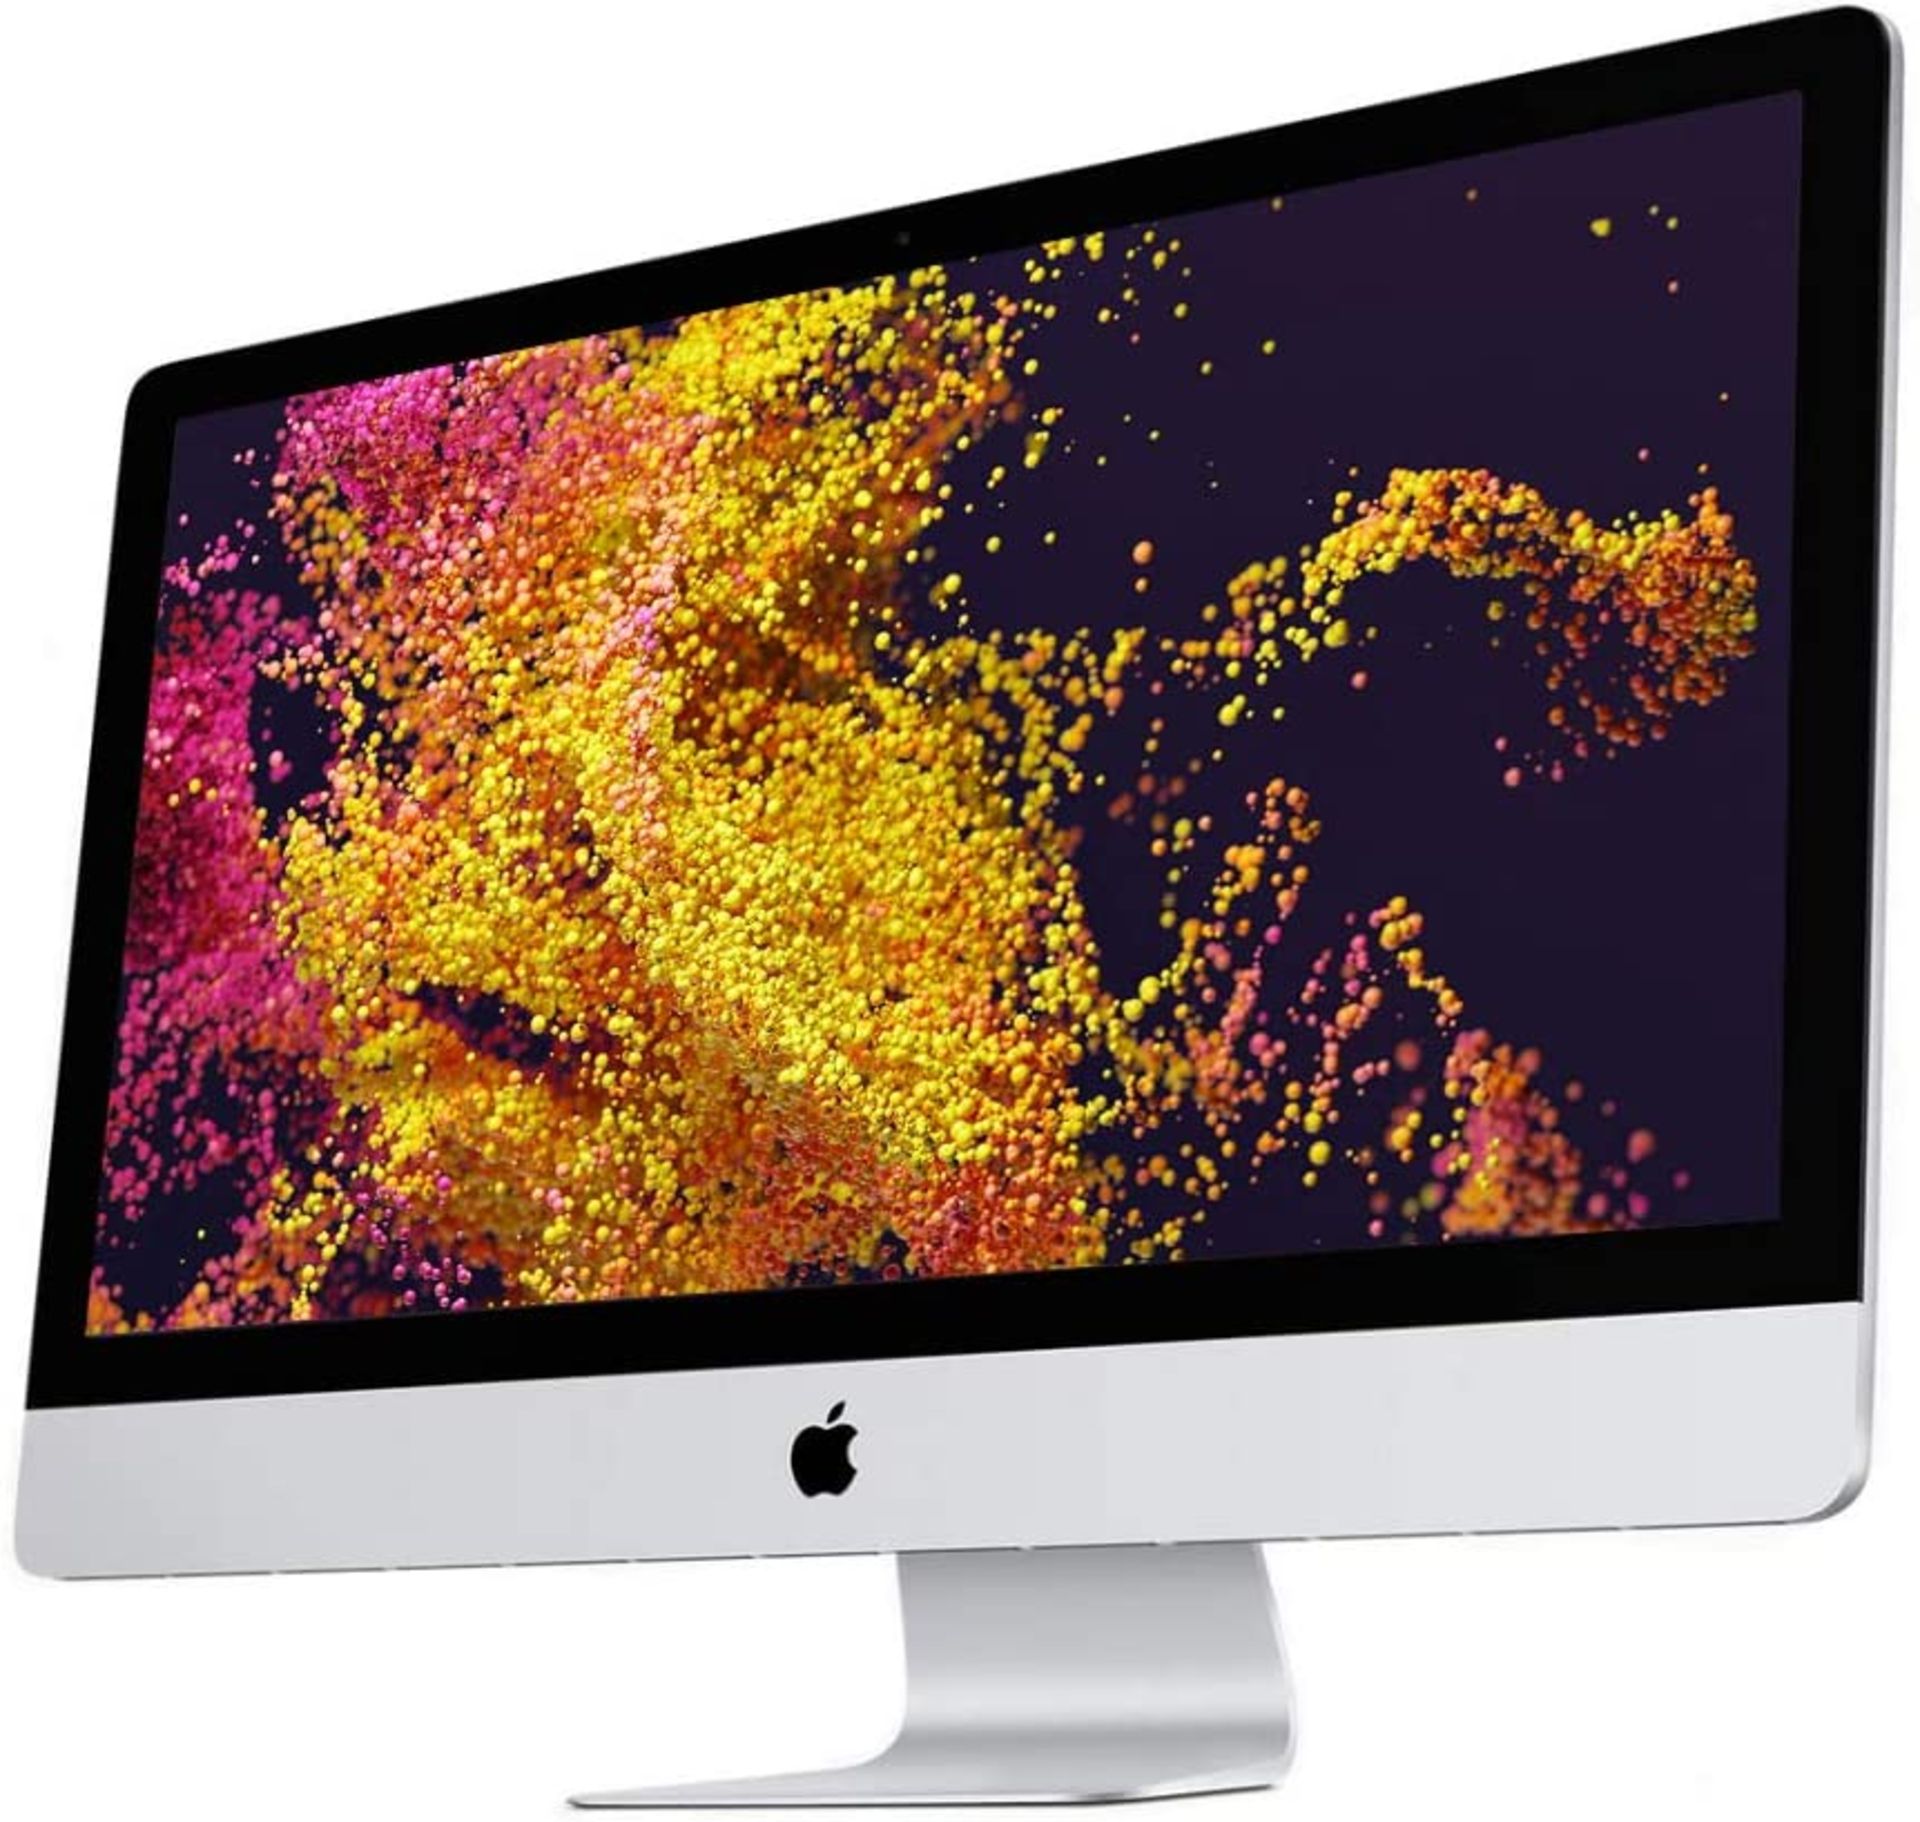 APPLE IMAC 20'' CORE 2 DUO 2GB 160GB GeForce. Complete Reset With Mac OS X, And Microsoft Office Pre